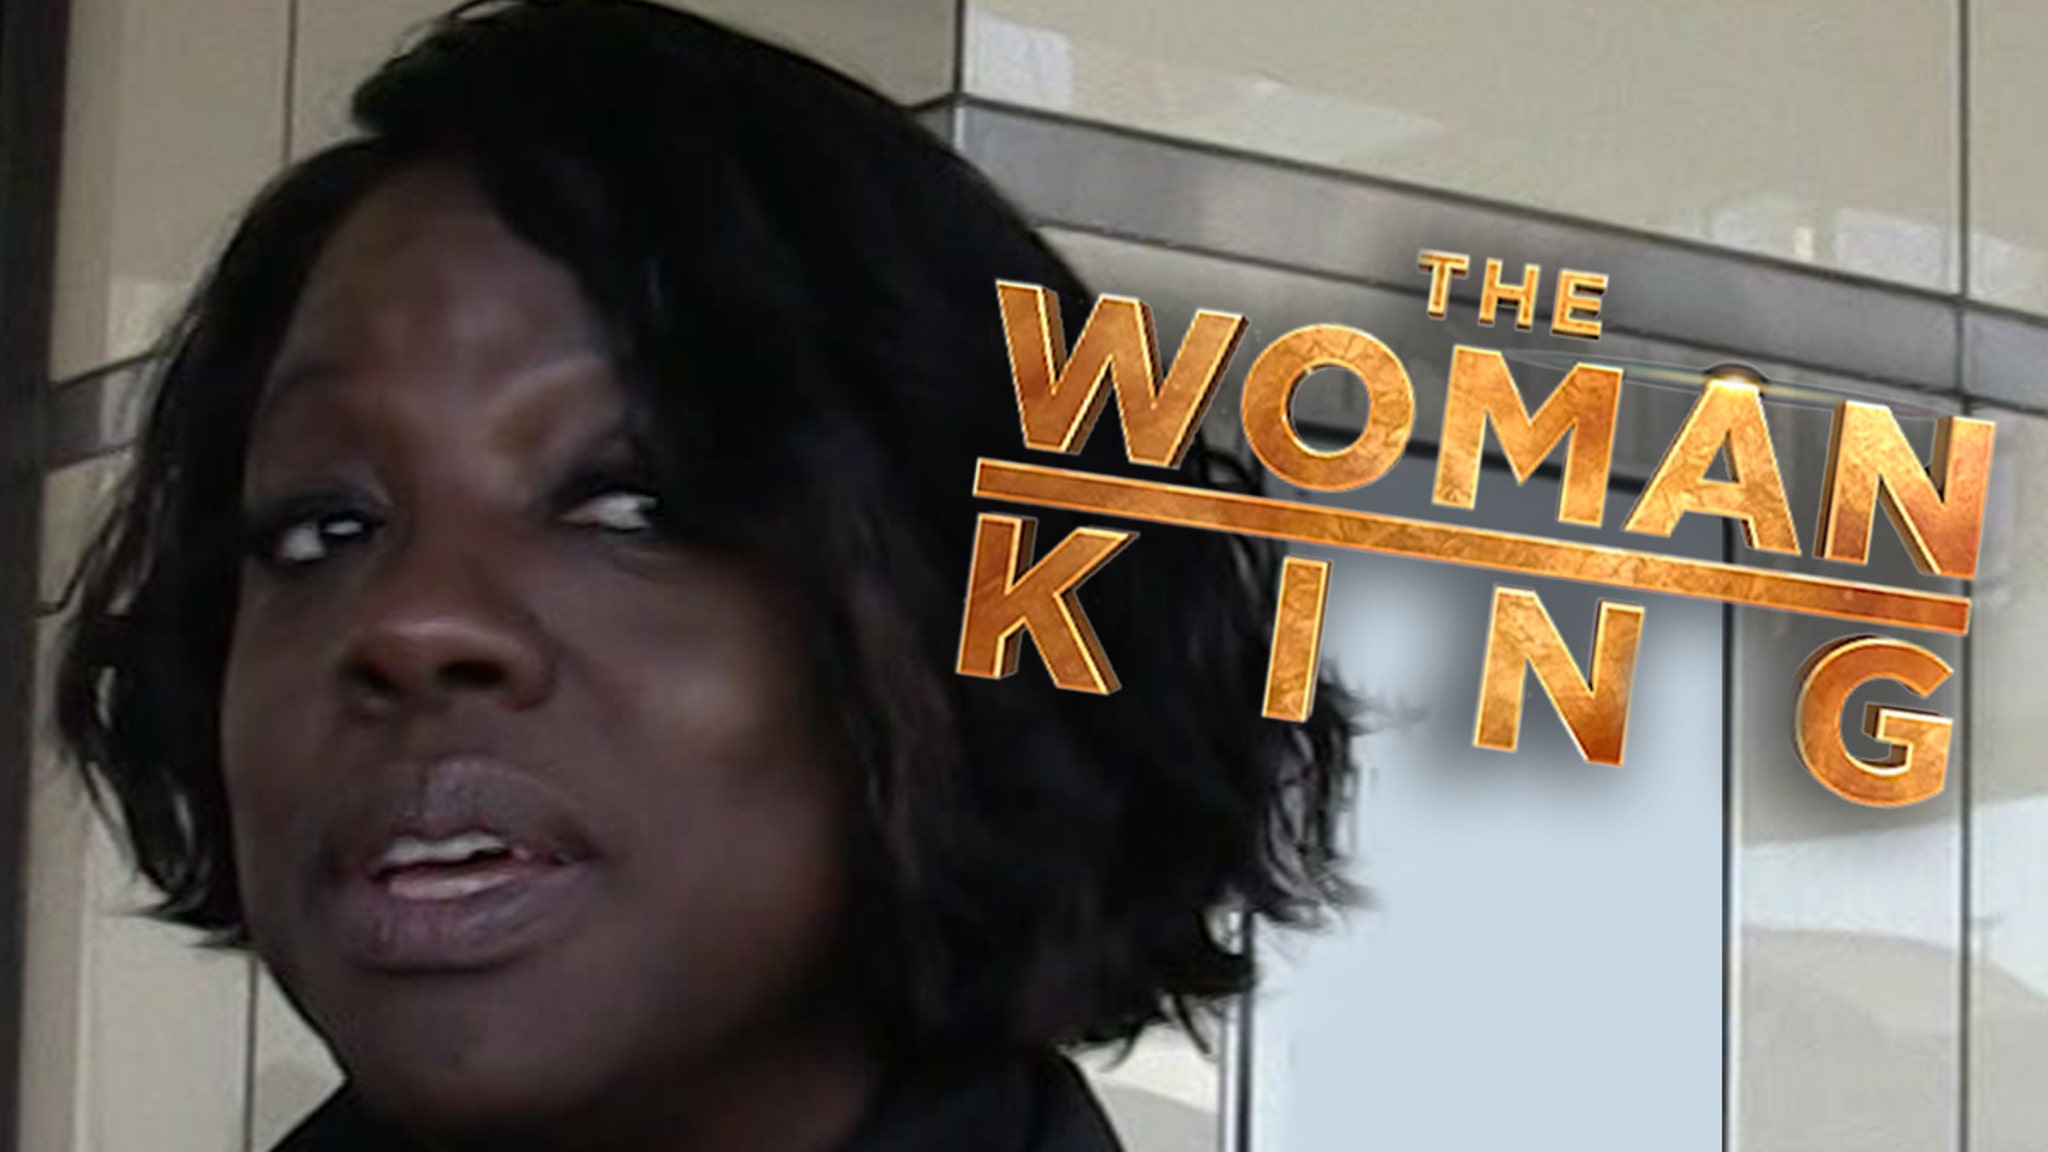 The Woman King: The truth about slavery matters, Arts and Culture